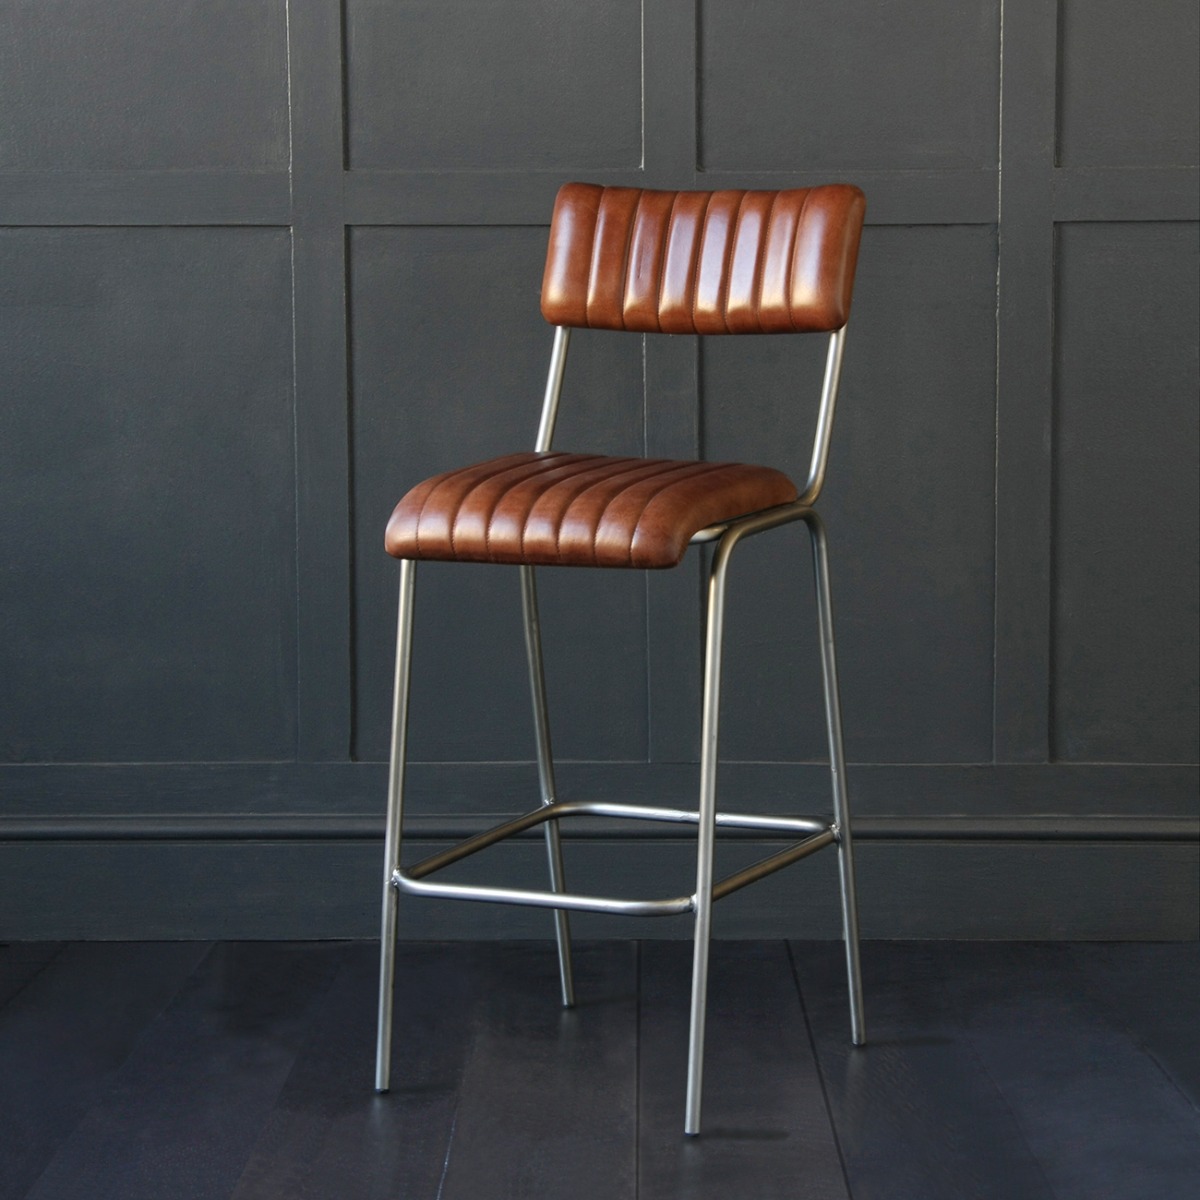 Our Diner Bar Stool boasts an effortless sense of mid-century style